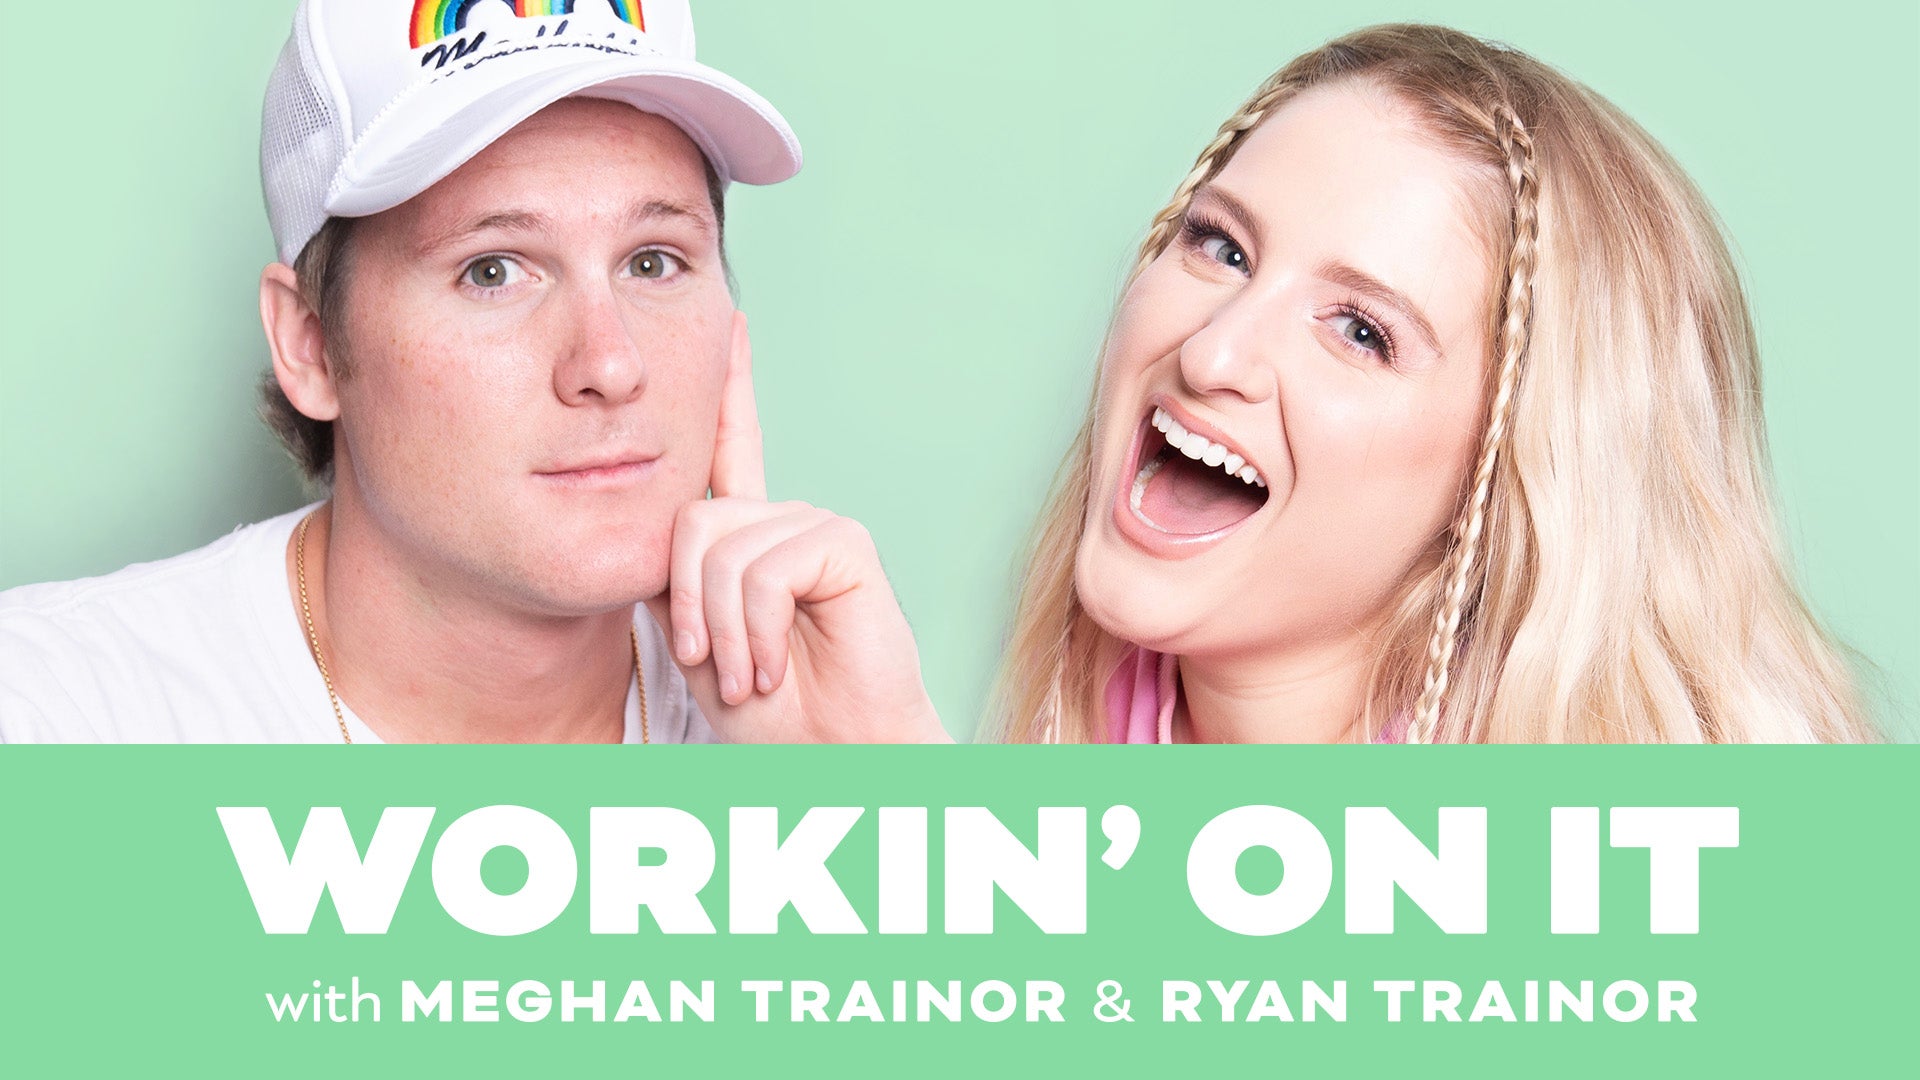 MEGHAN TRAINOR ANNOUNCES NEW PODCAST WORKIN’ ON IT CO-HOSTED WITH BROTHER RYAN TRAINOR